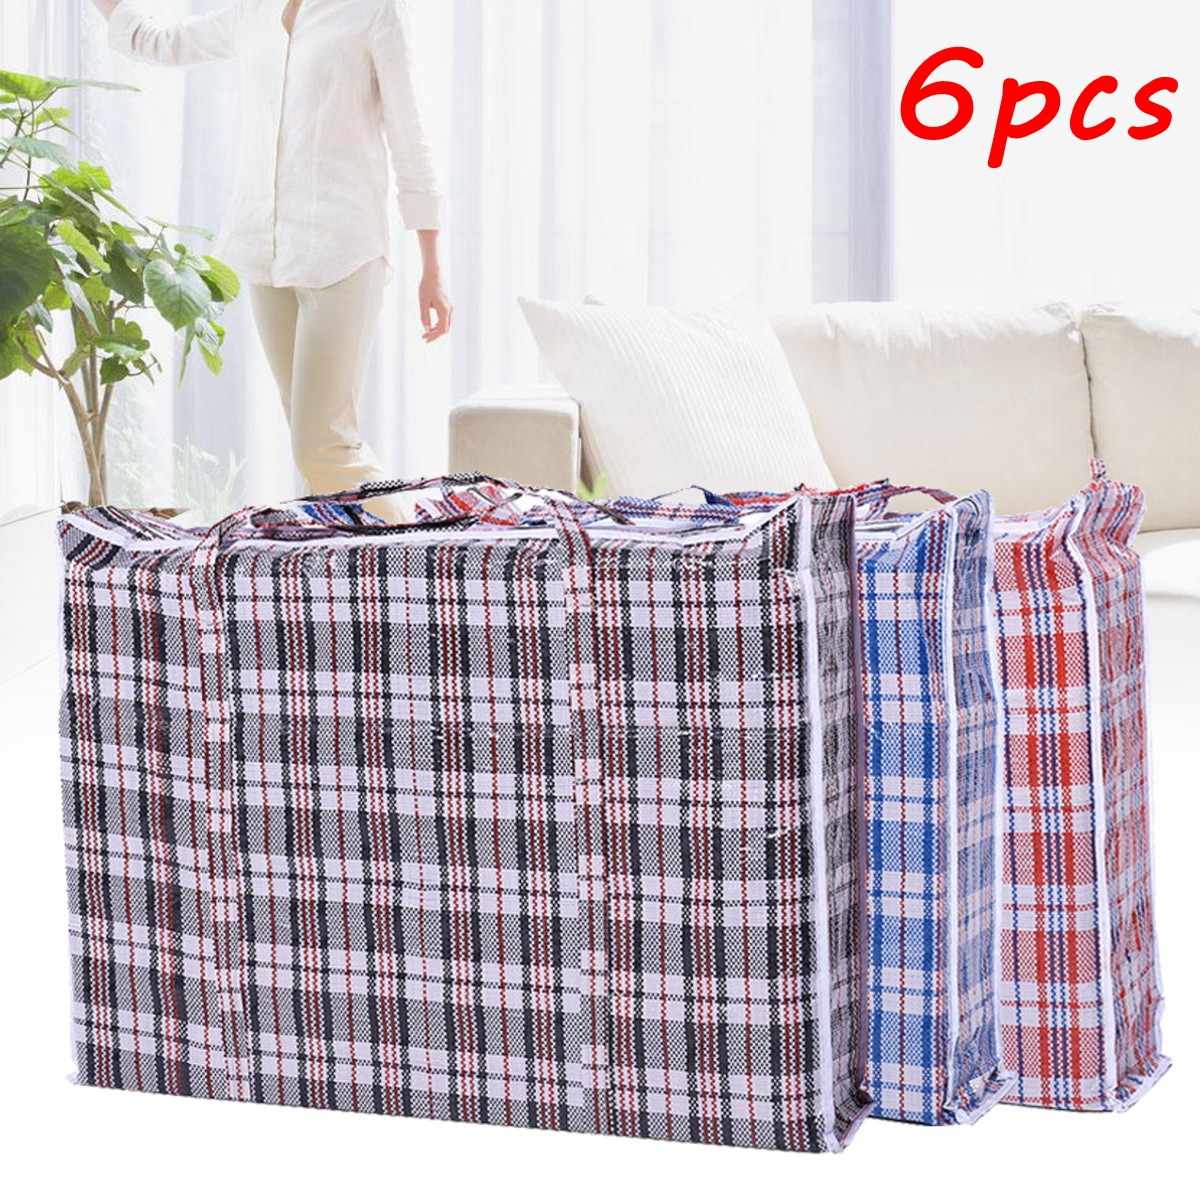 6Pcs Large Clothes Packing Storage Moving Travel Bags Shopping Laundry Bulk Woven Travel Bag Pack Up Move Luggage Bag 50x50x12cm